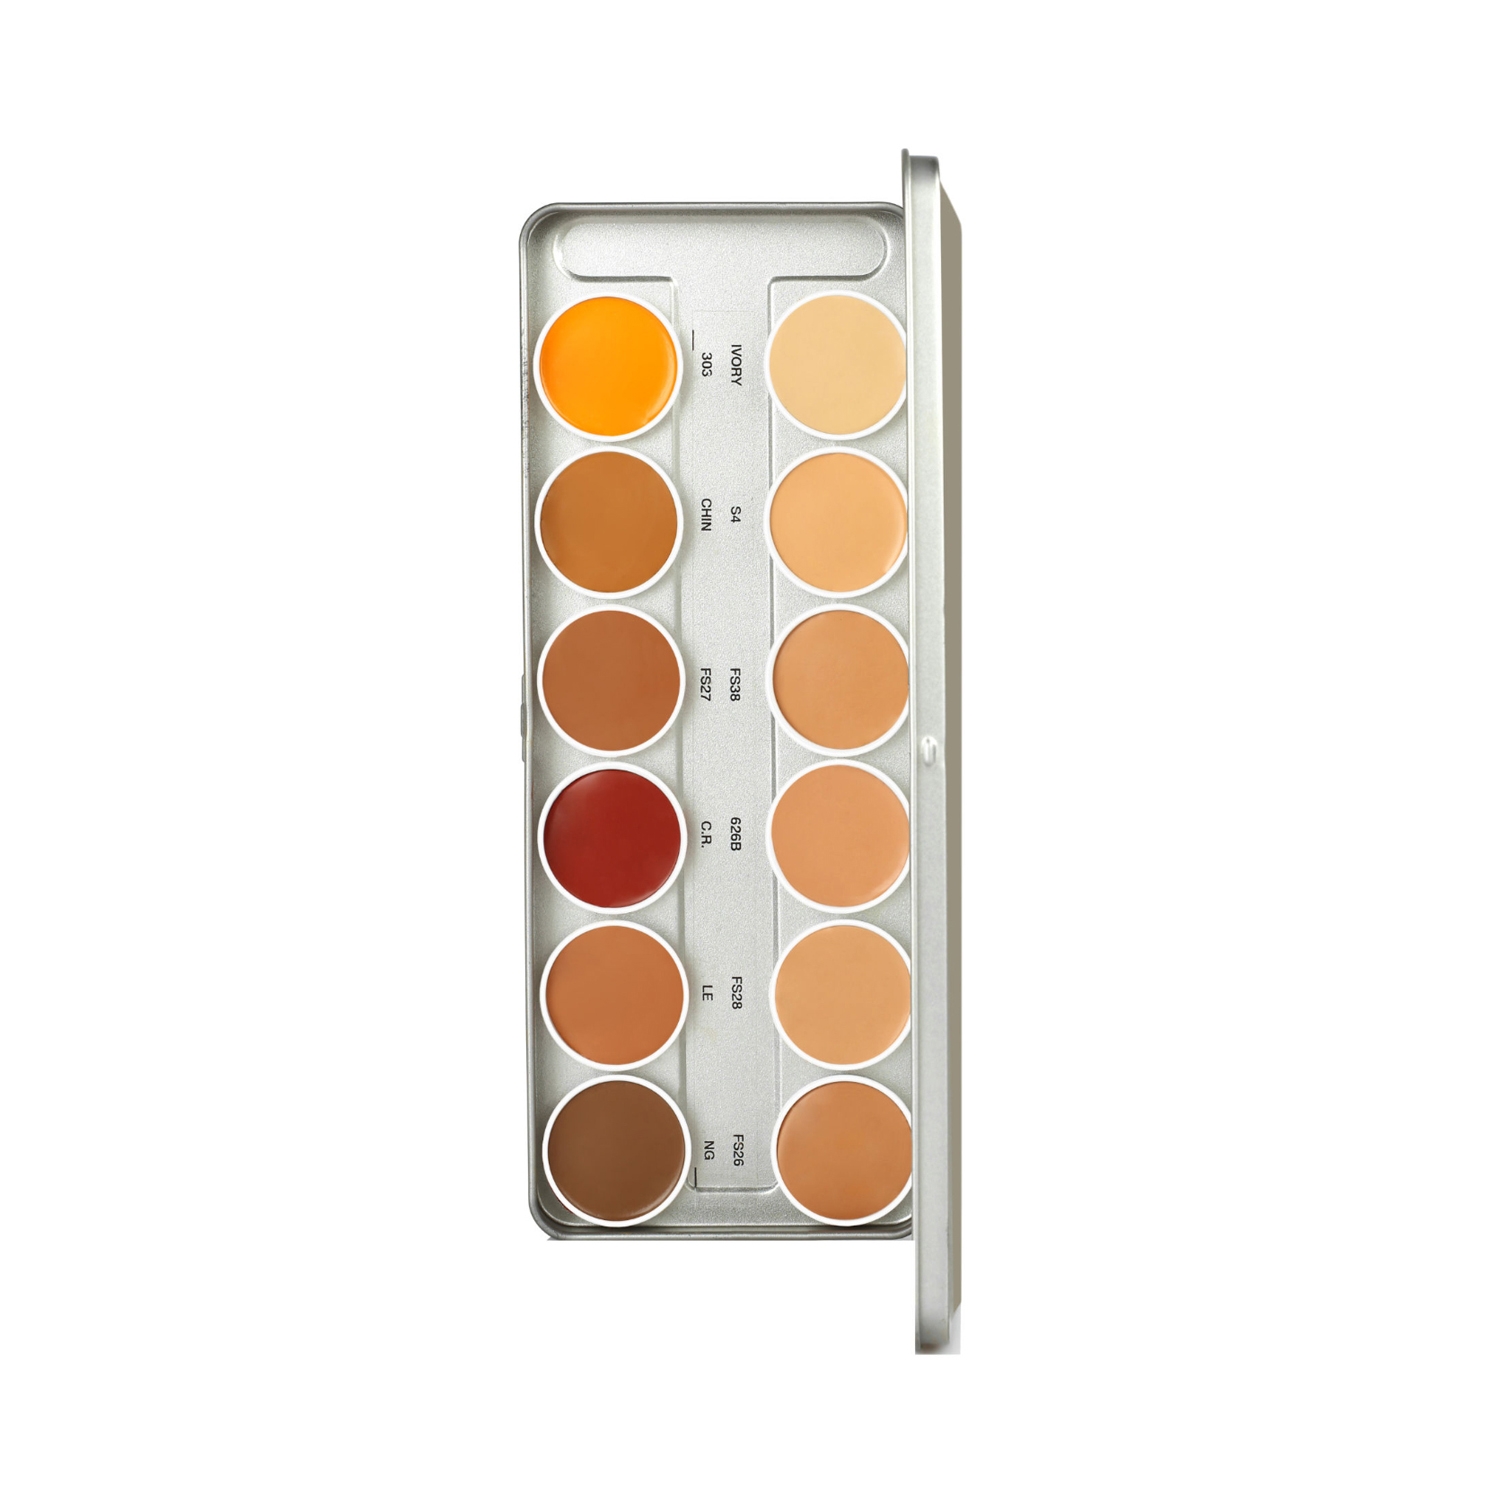 Stars Cosmetics | Stars Cosmetics 12 Color Shades Face Makeup Palette - Multi-Color (48g)